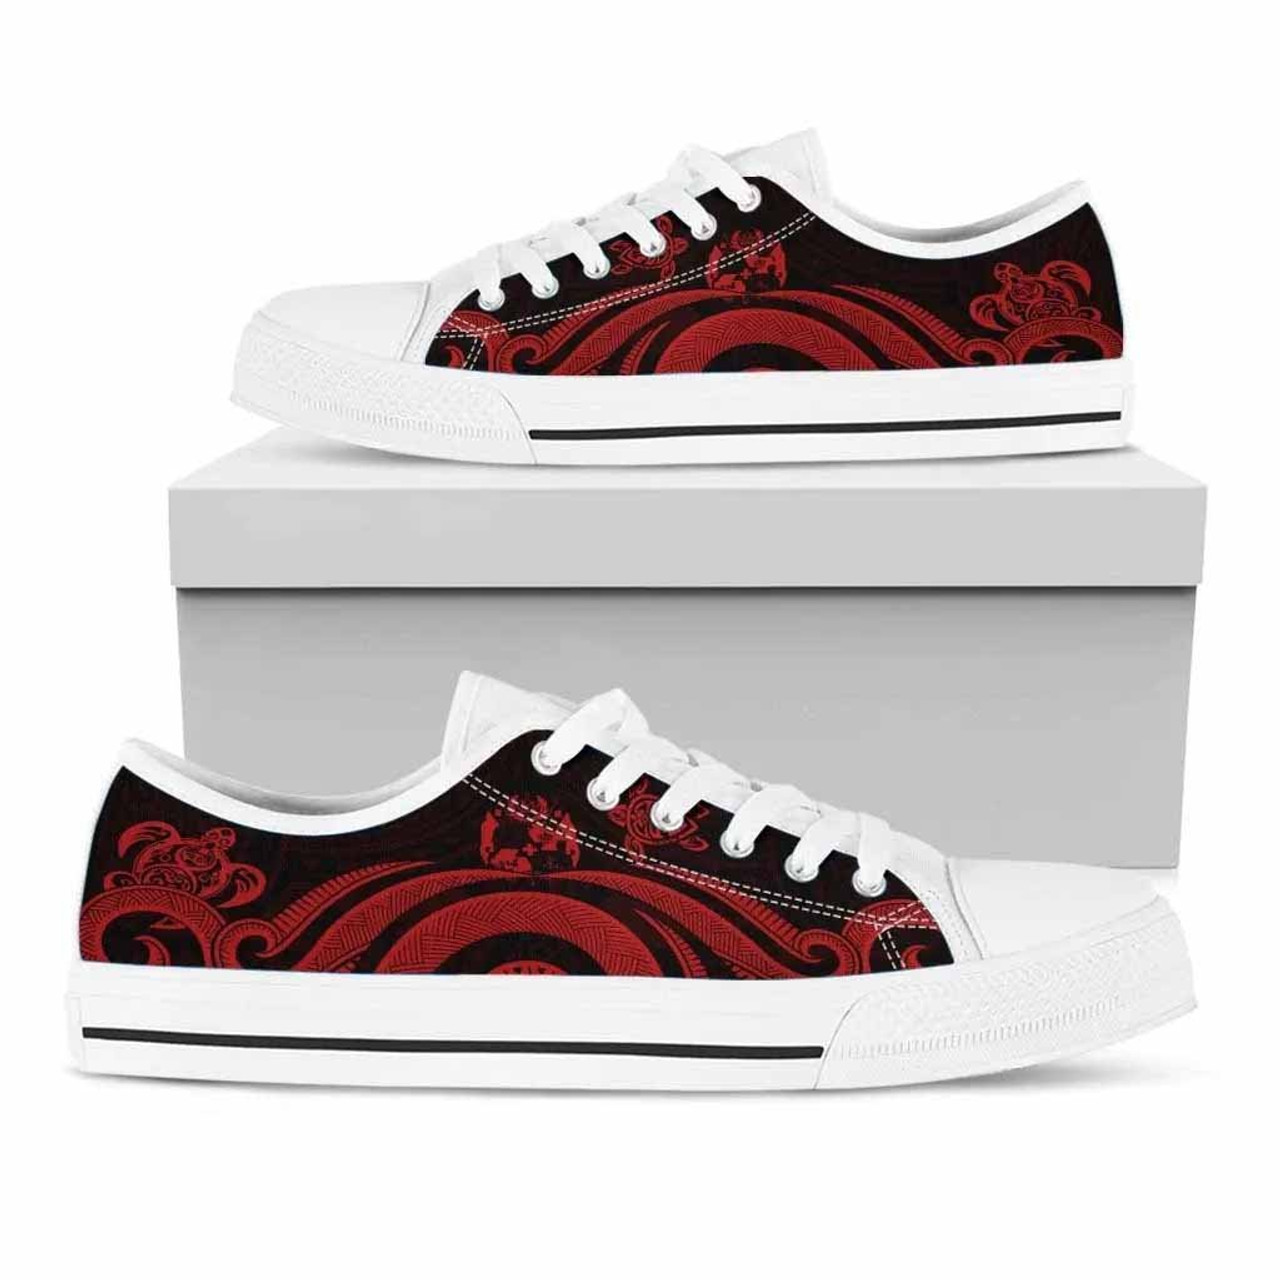 Tonga Low Top Canvas Shoes - Red Tentacle Turtle 6